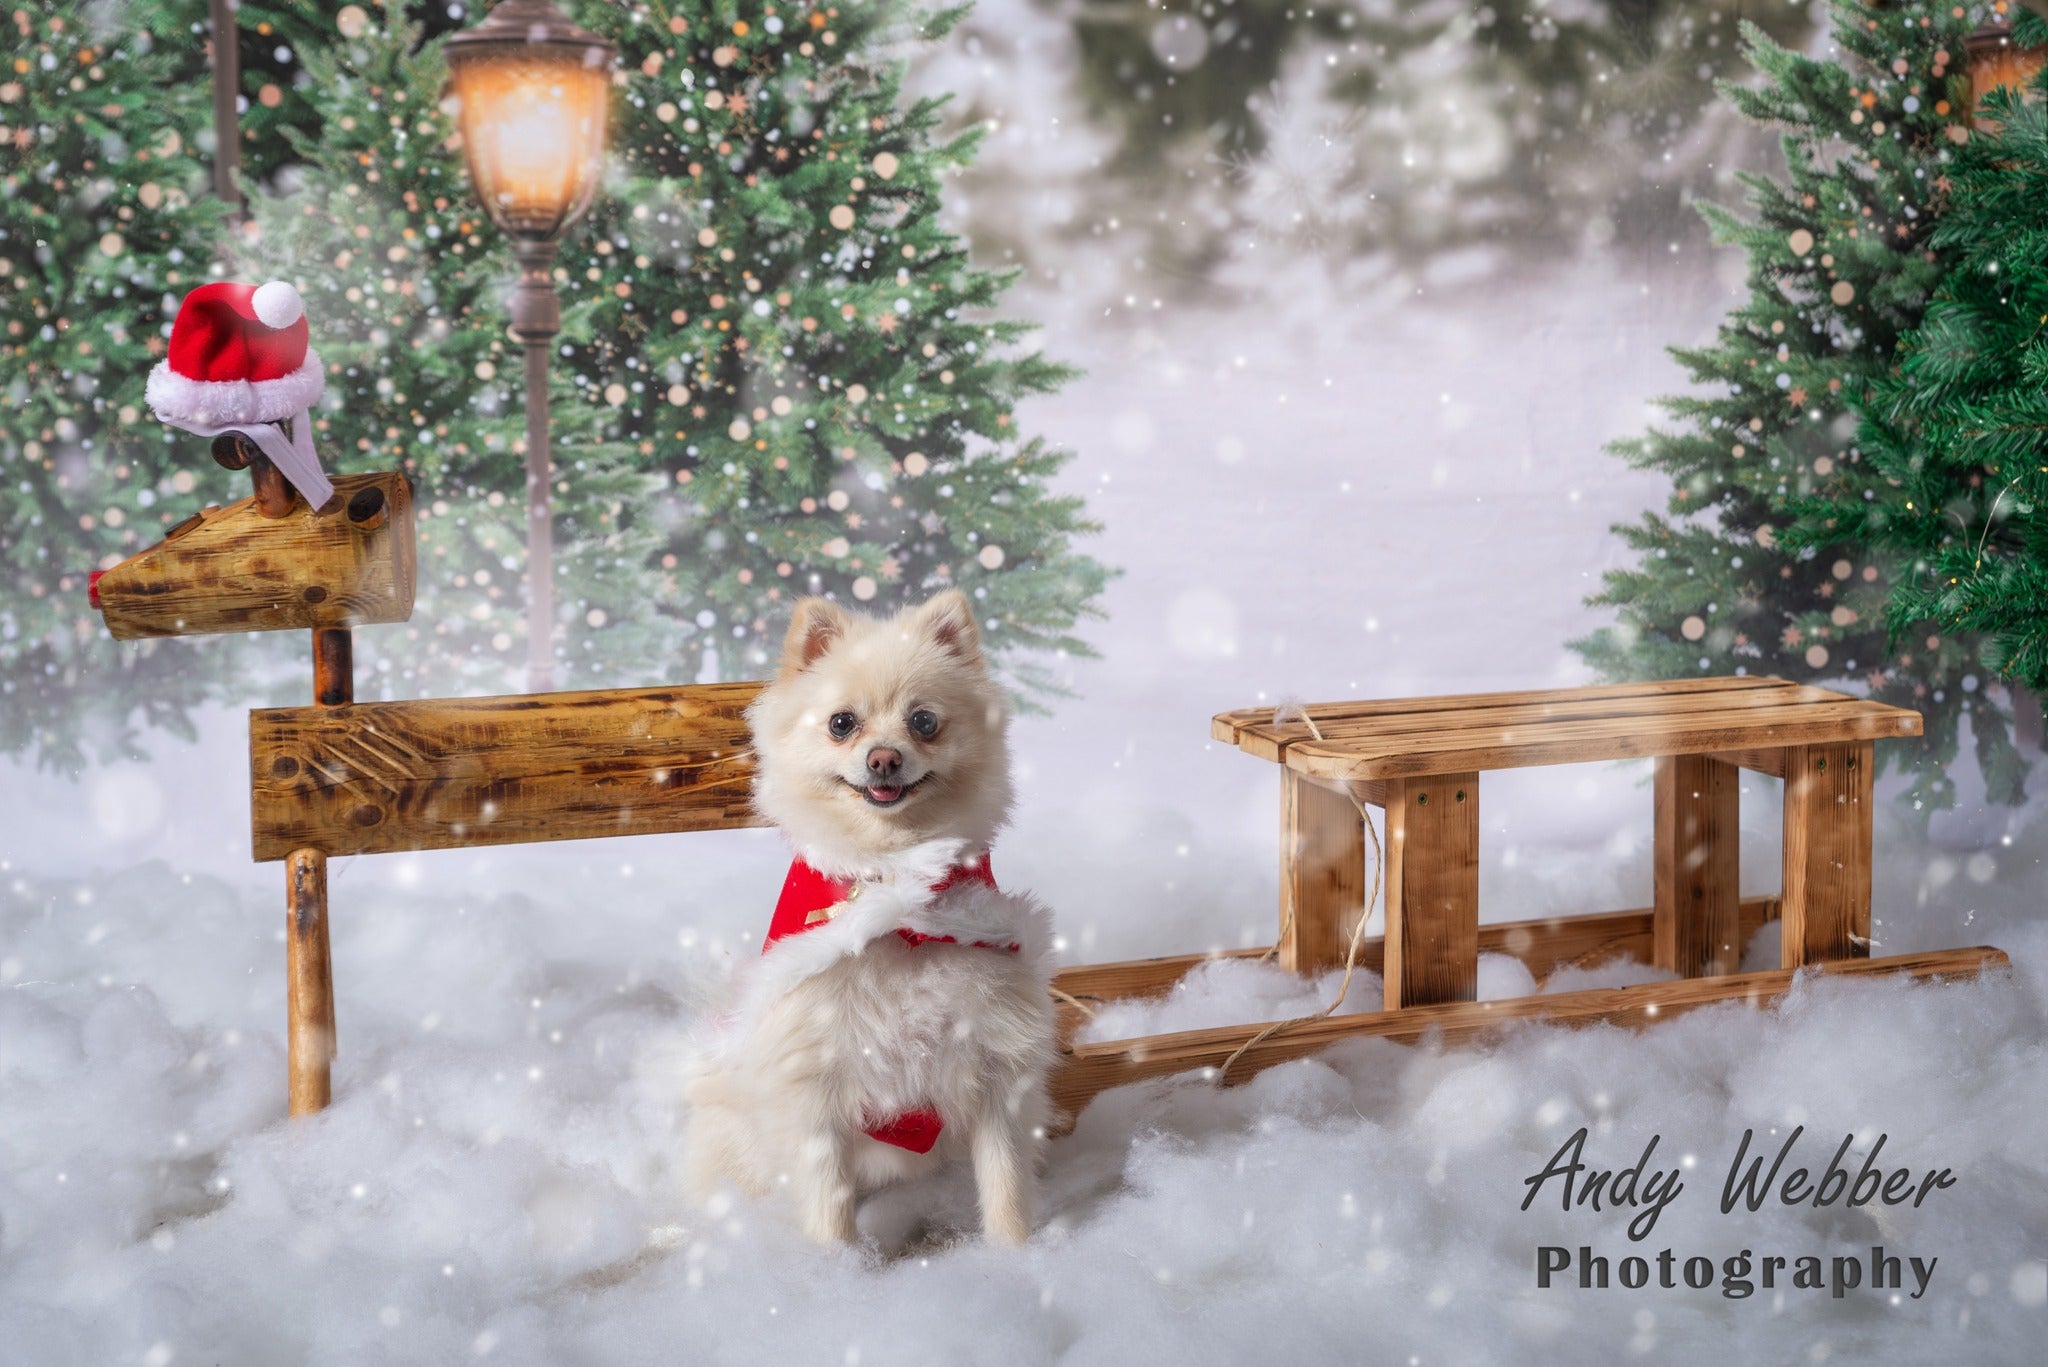 Kate Christmas Snow Forest Lights Backdrop for Photography